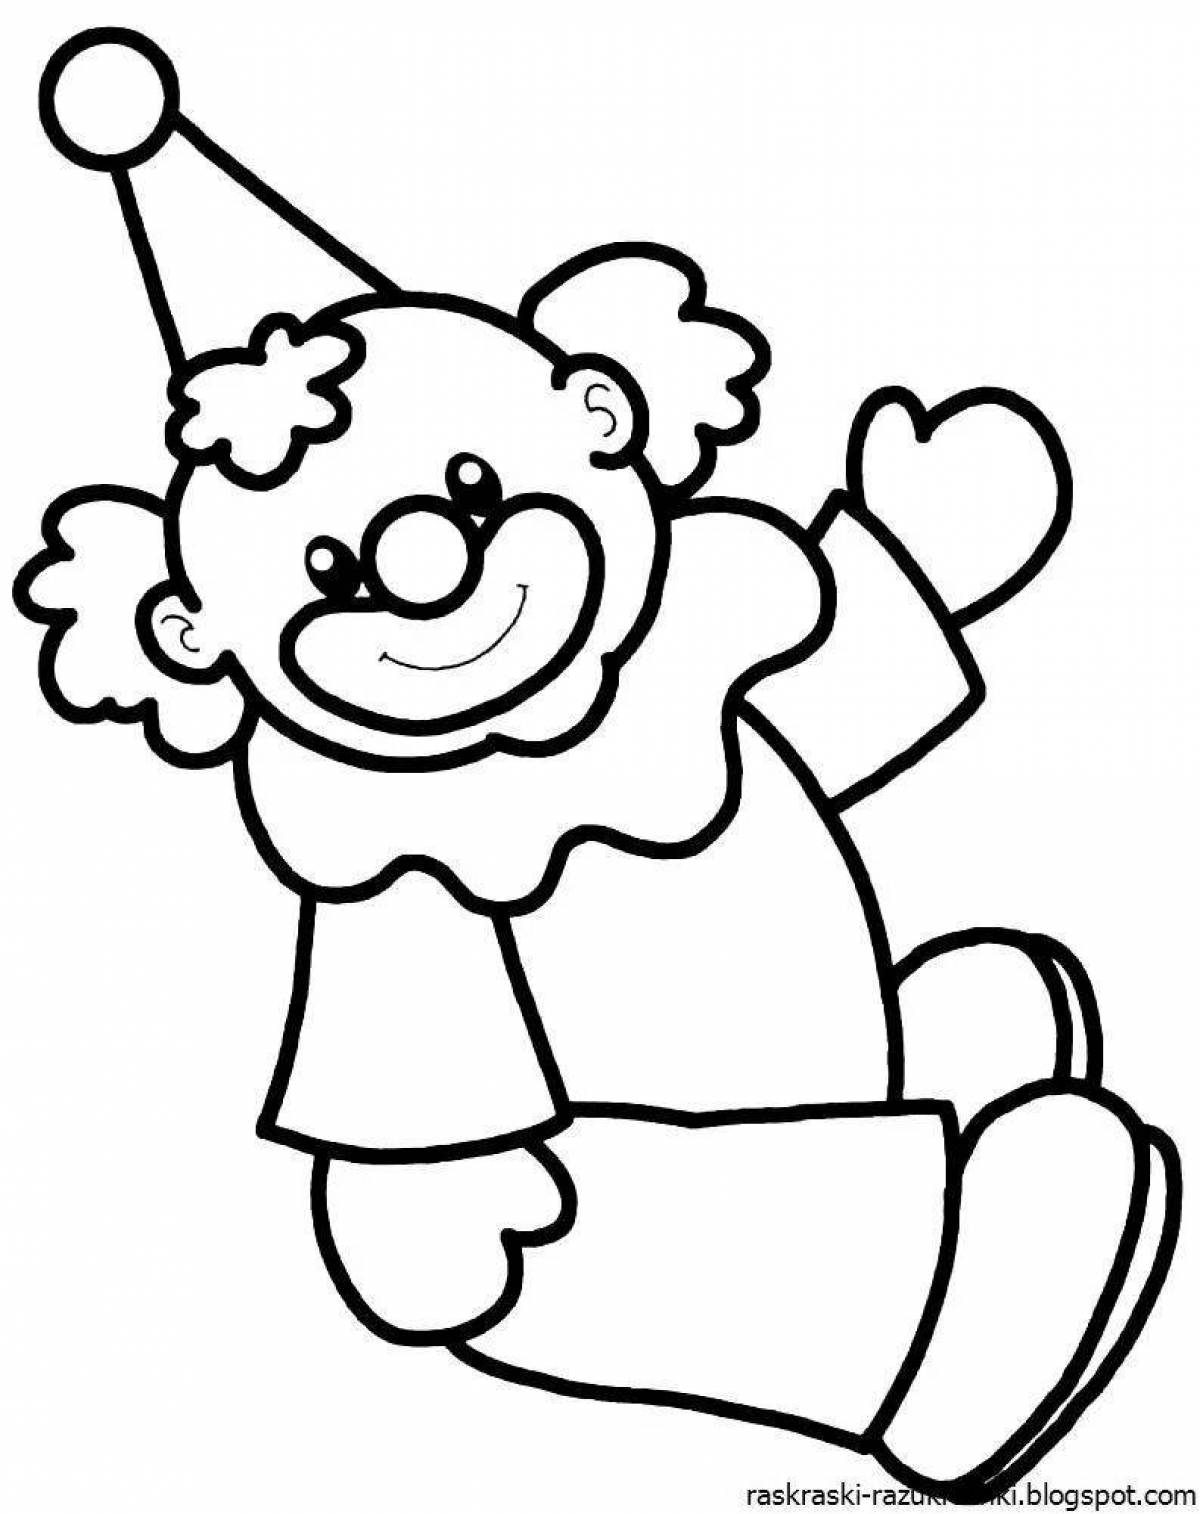 Coloring pages with parsley for children 3-4 years old